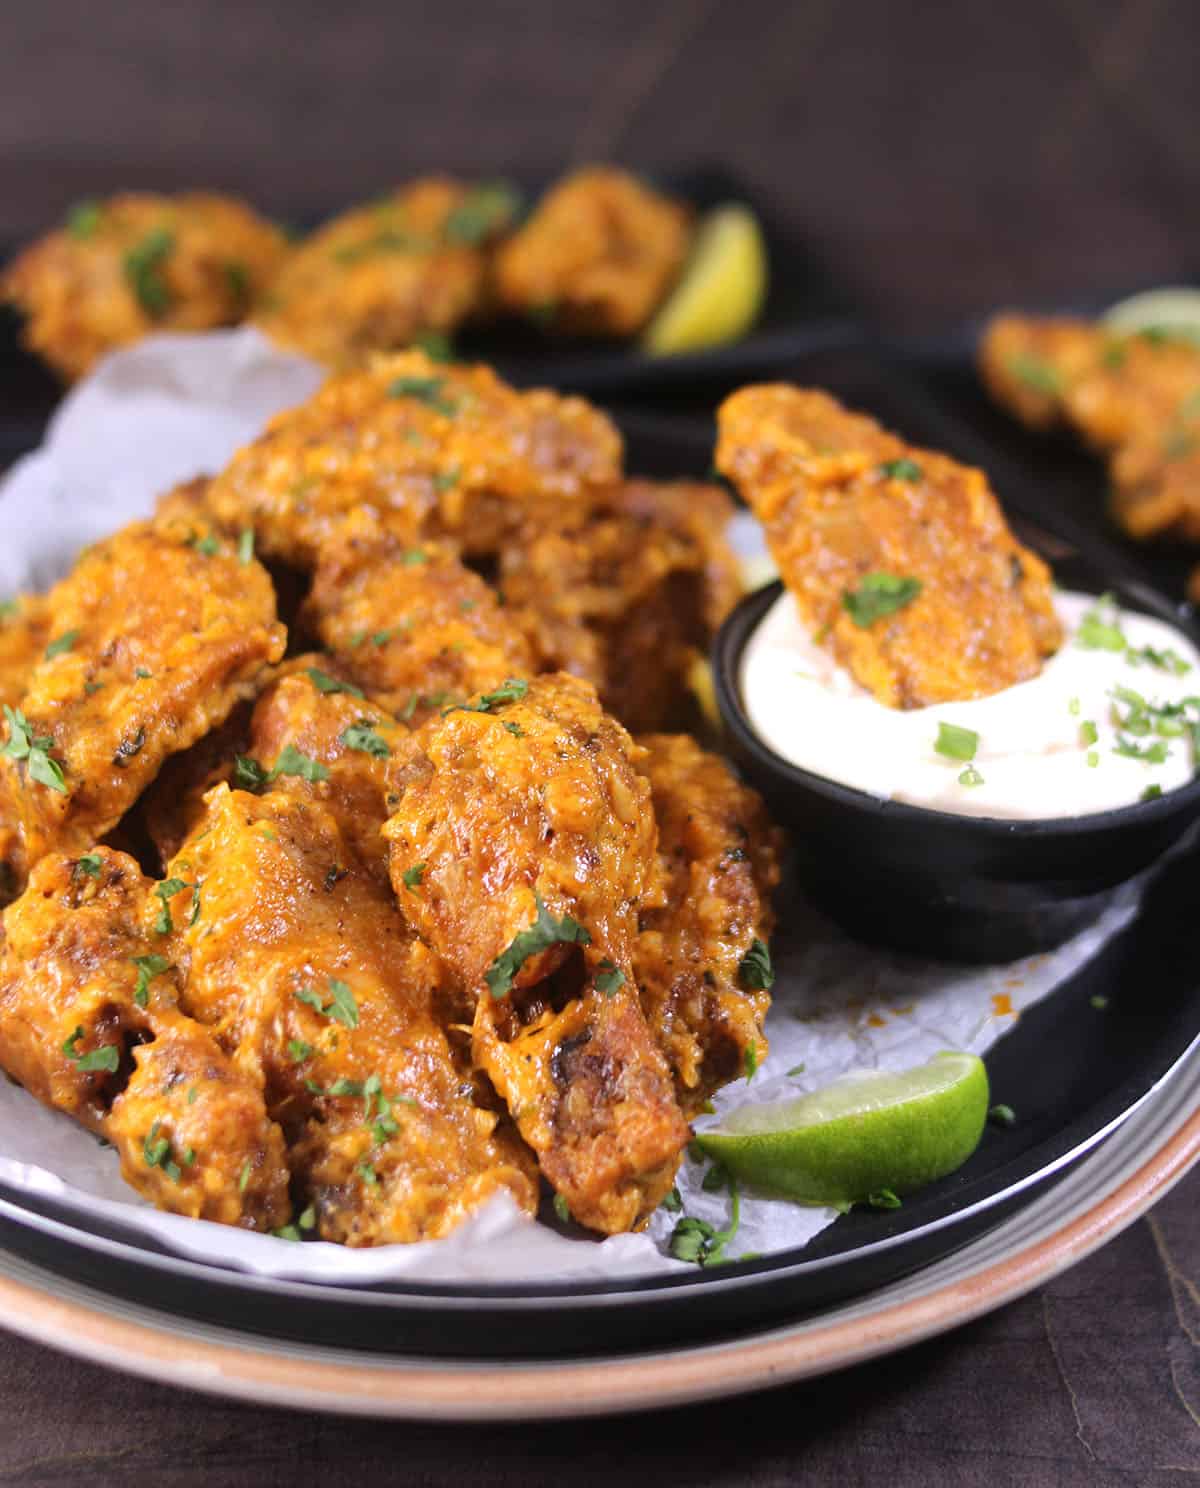 Crispy fried Garlic chicken wings | Best chicken appetizer for parties, super bowl game night.